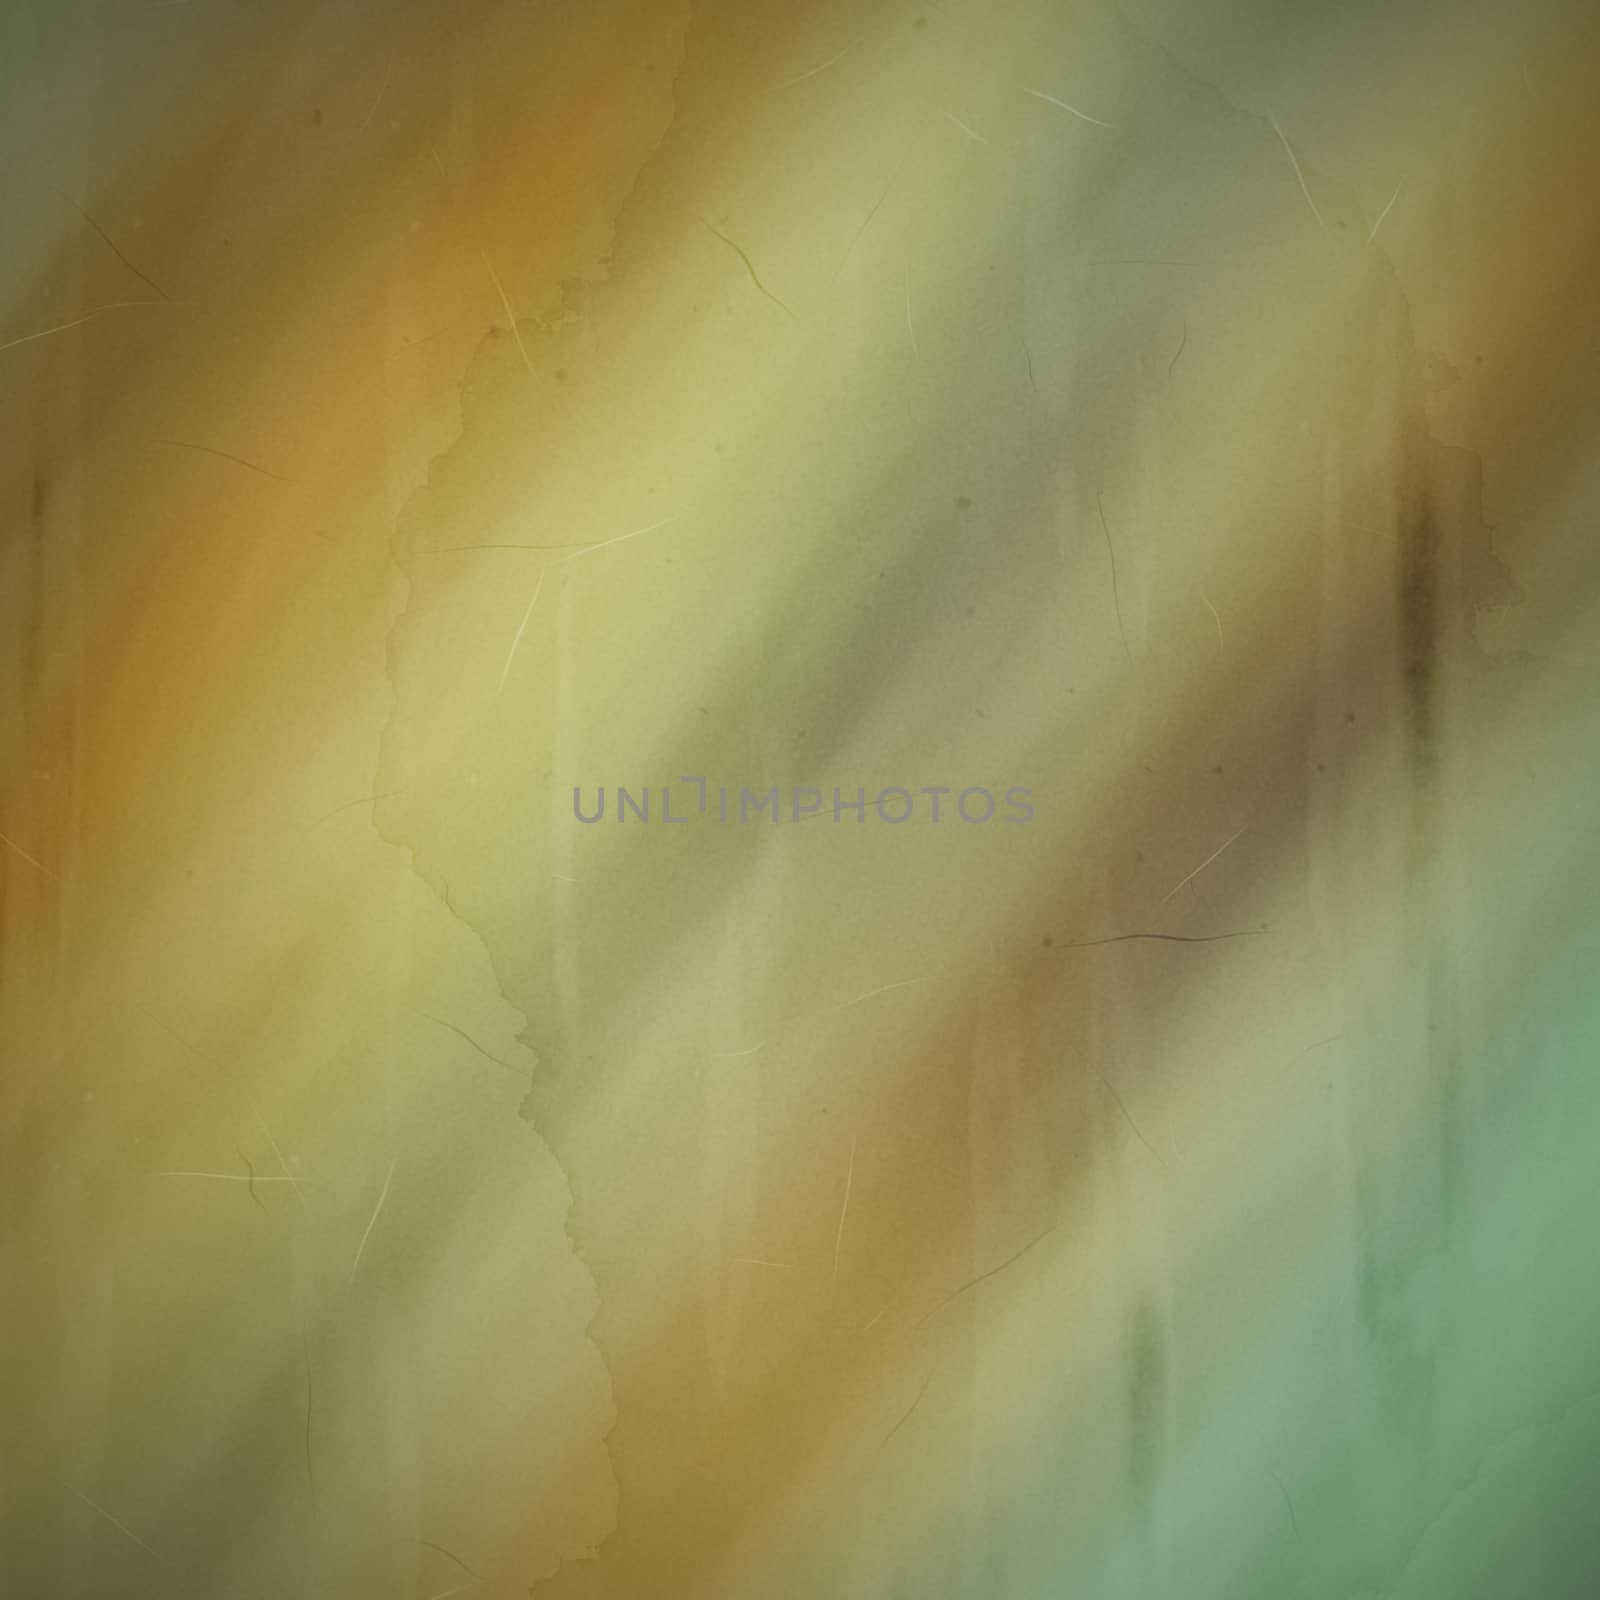 An image of an old grunge texture background